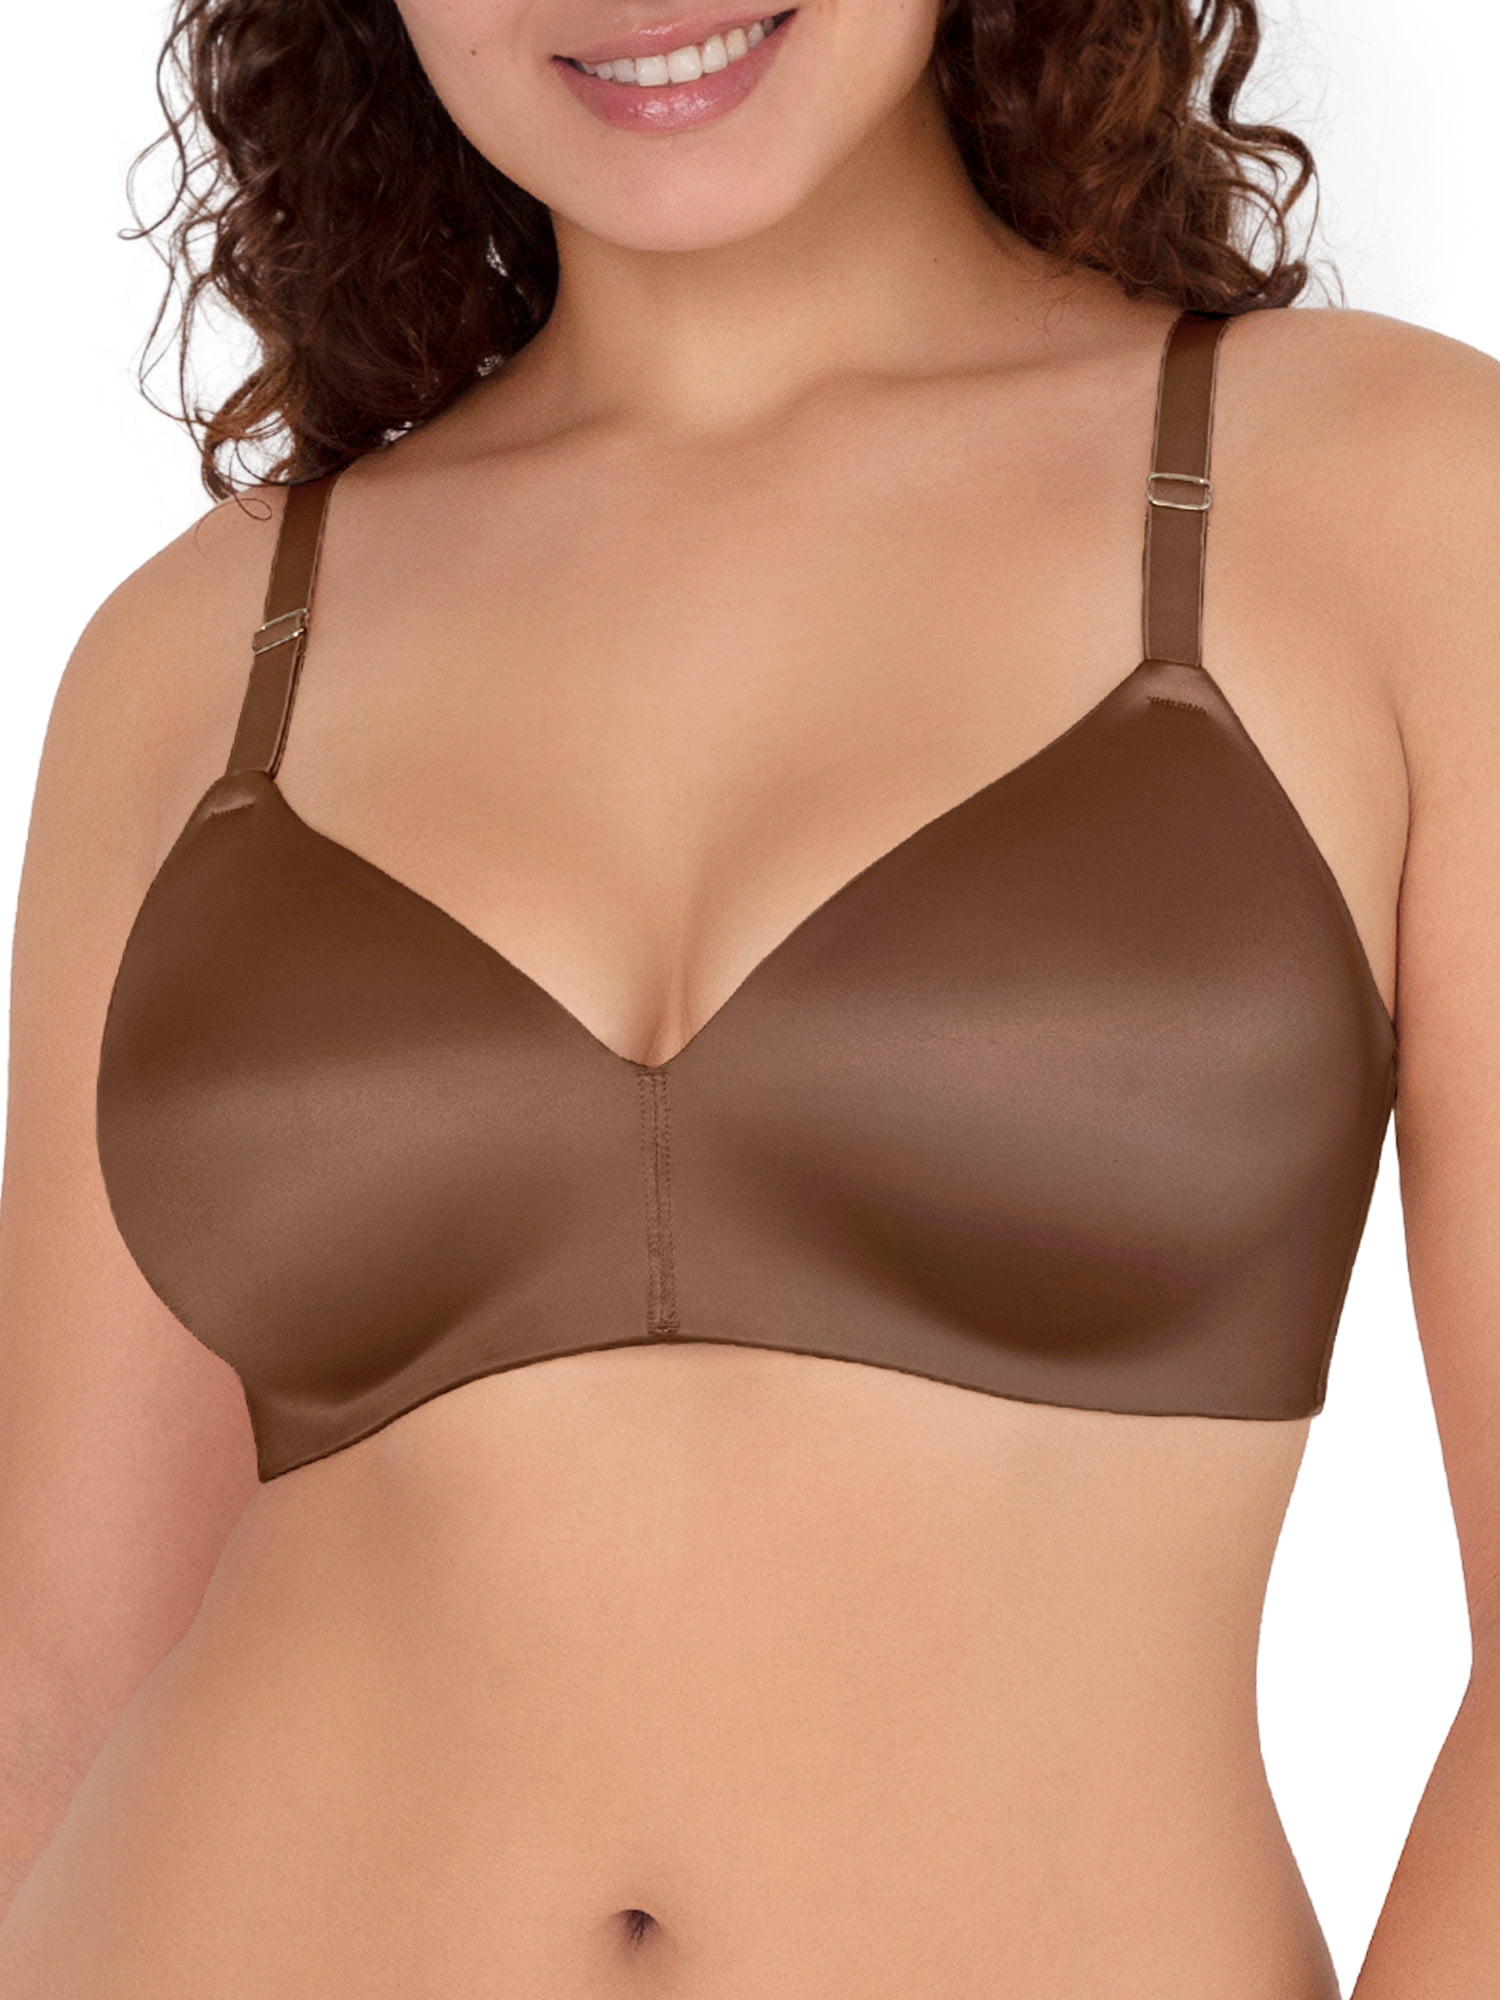 Secret Treasure Women's Wireless Bra With Back and Side Smoothing